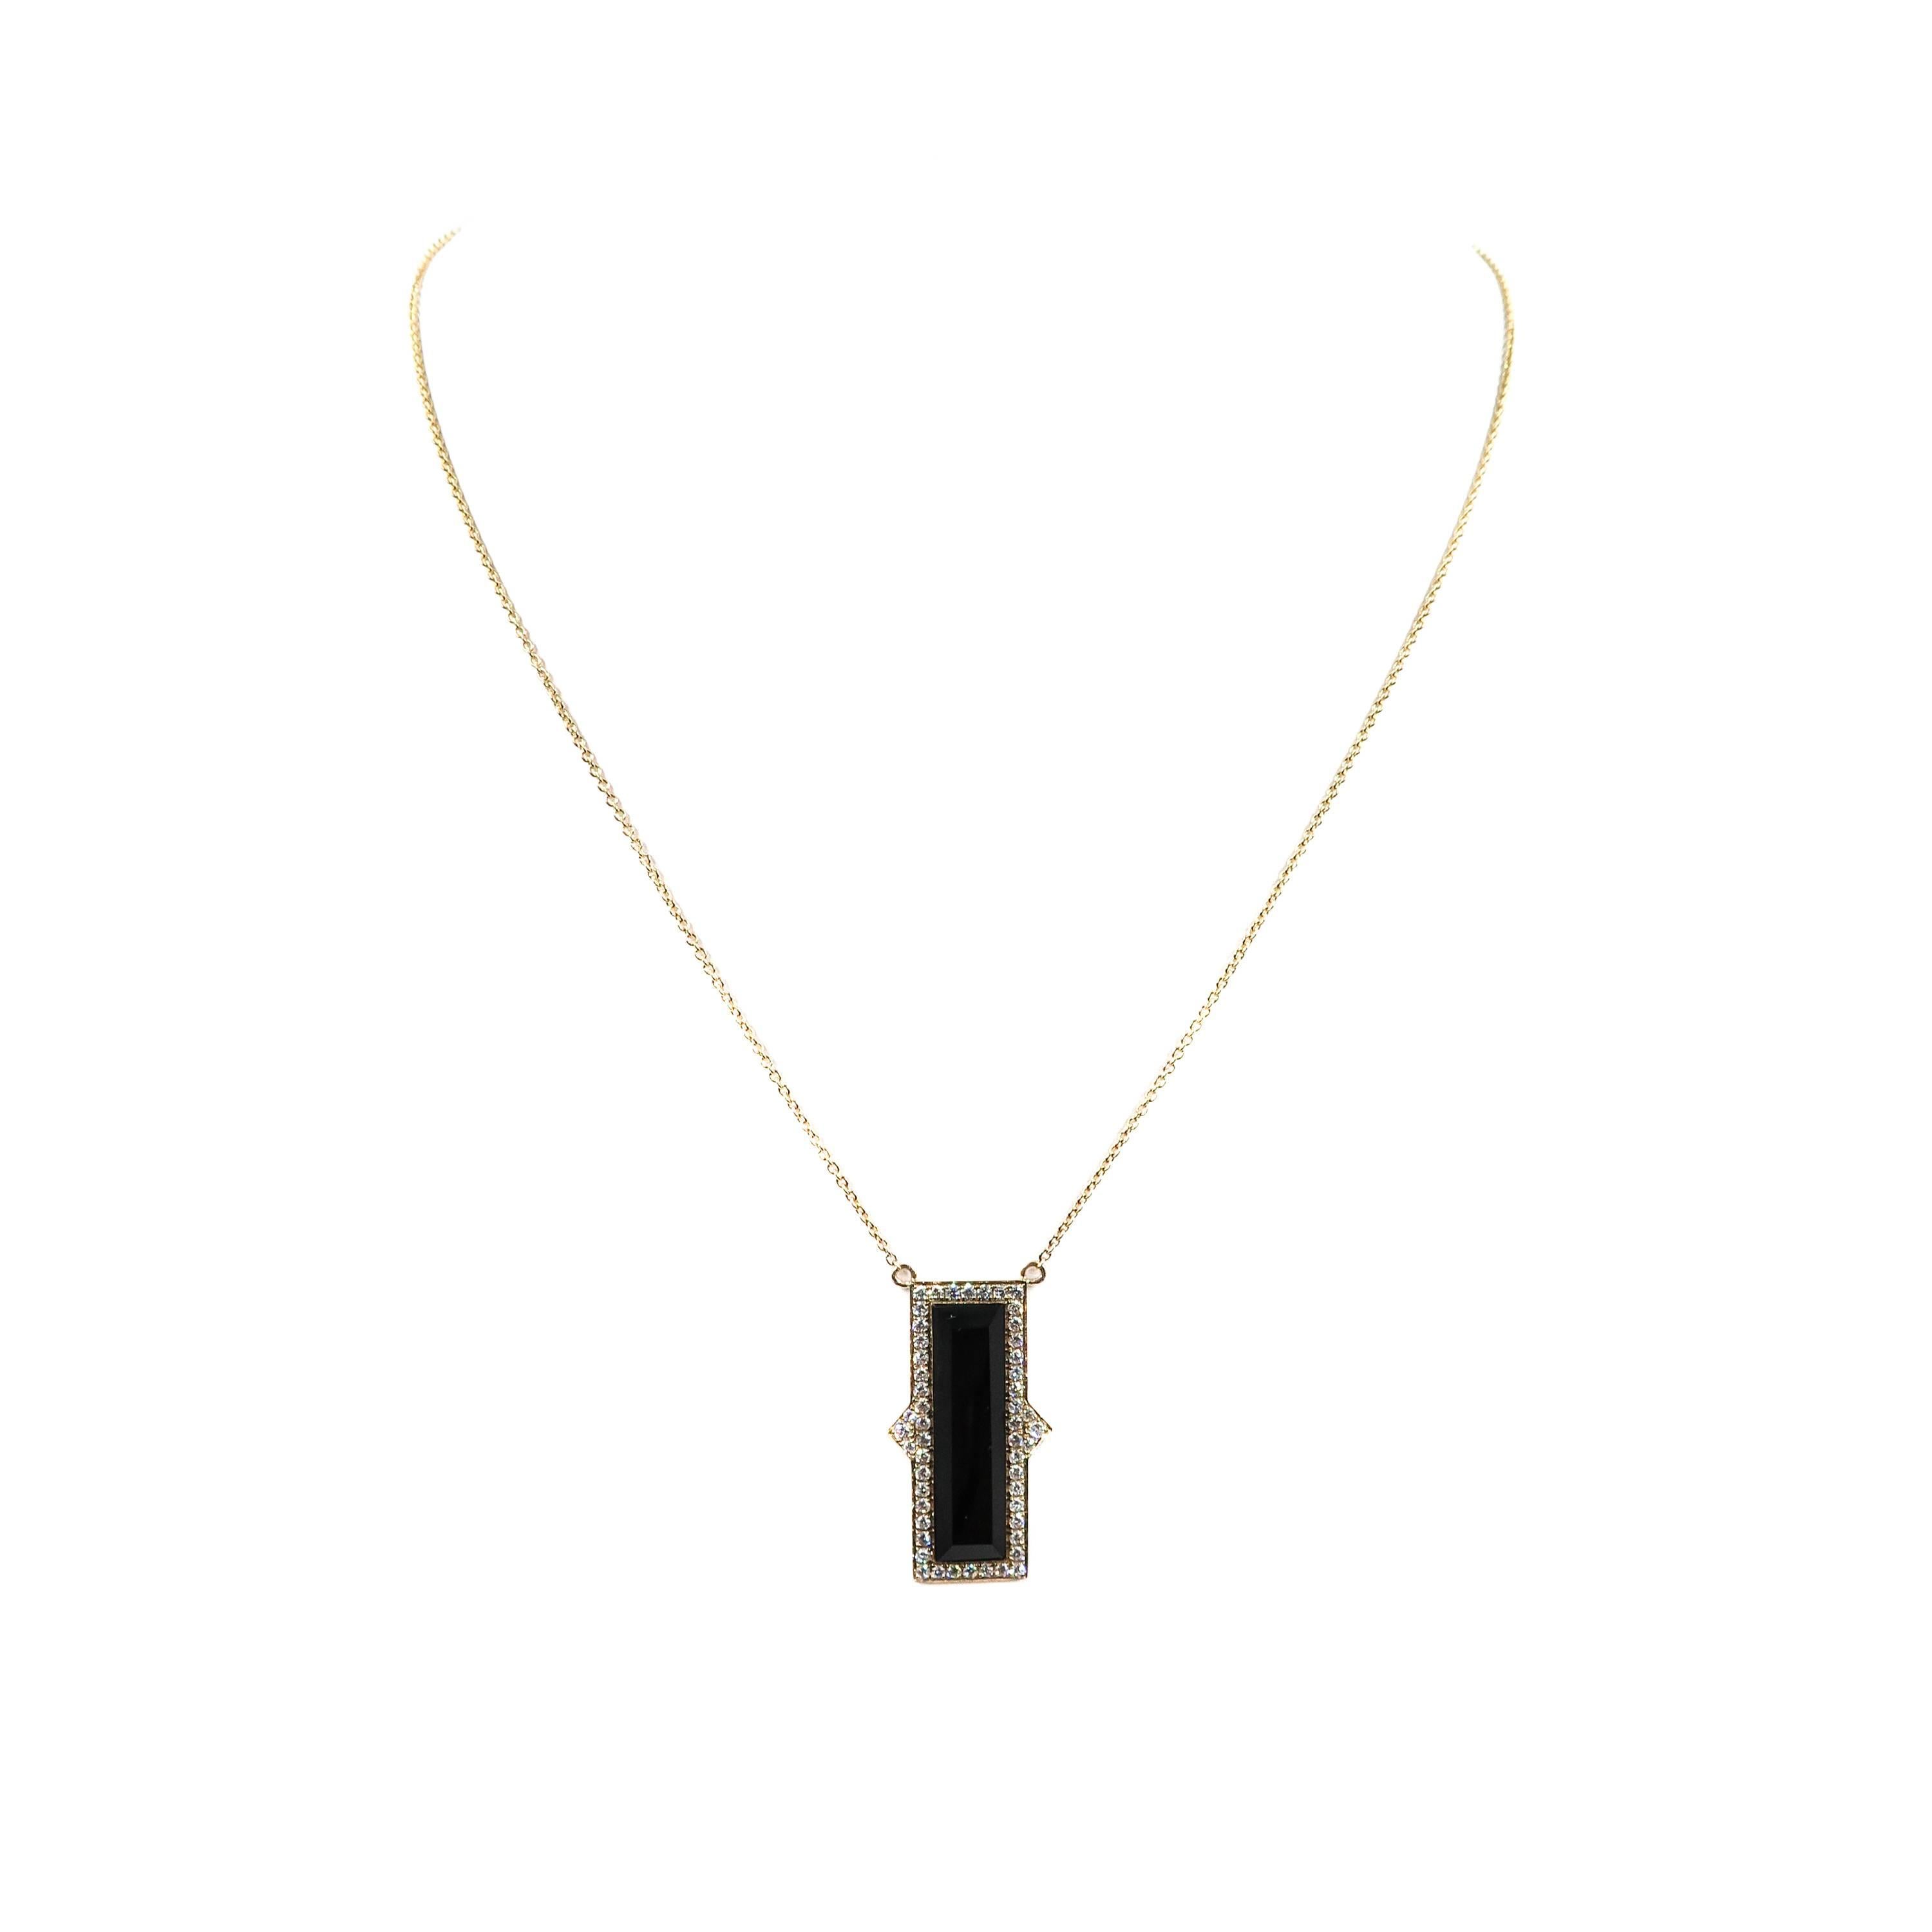 This incredible Black Onyx and Diamond Pendant is an eye catching and sleek design, a winning combination of black onyx, diamond and gold. 
Handcrafted in 18k yellow gold, black onyx and adorned with white round brilliant cut diamonds, designed by